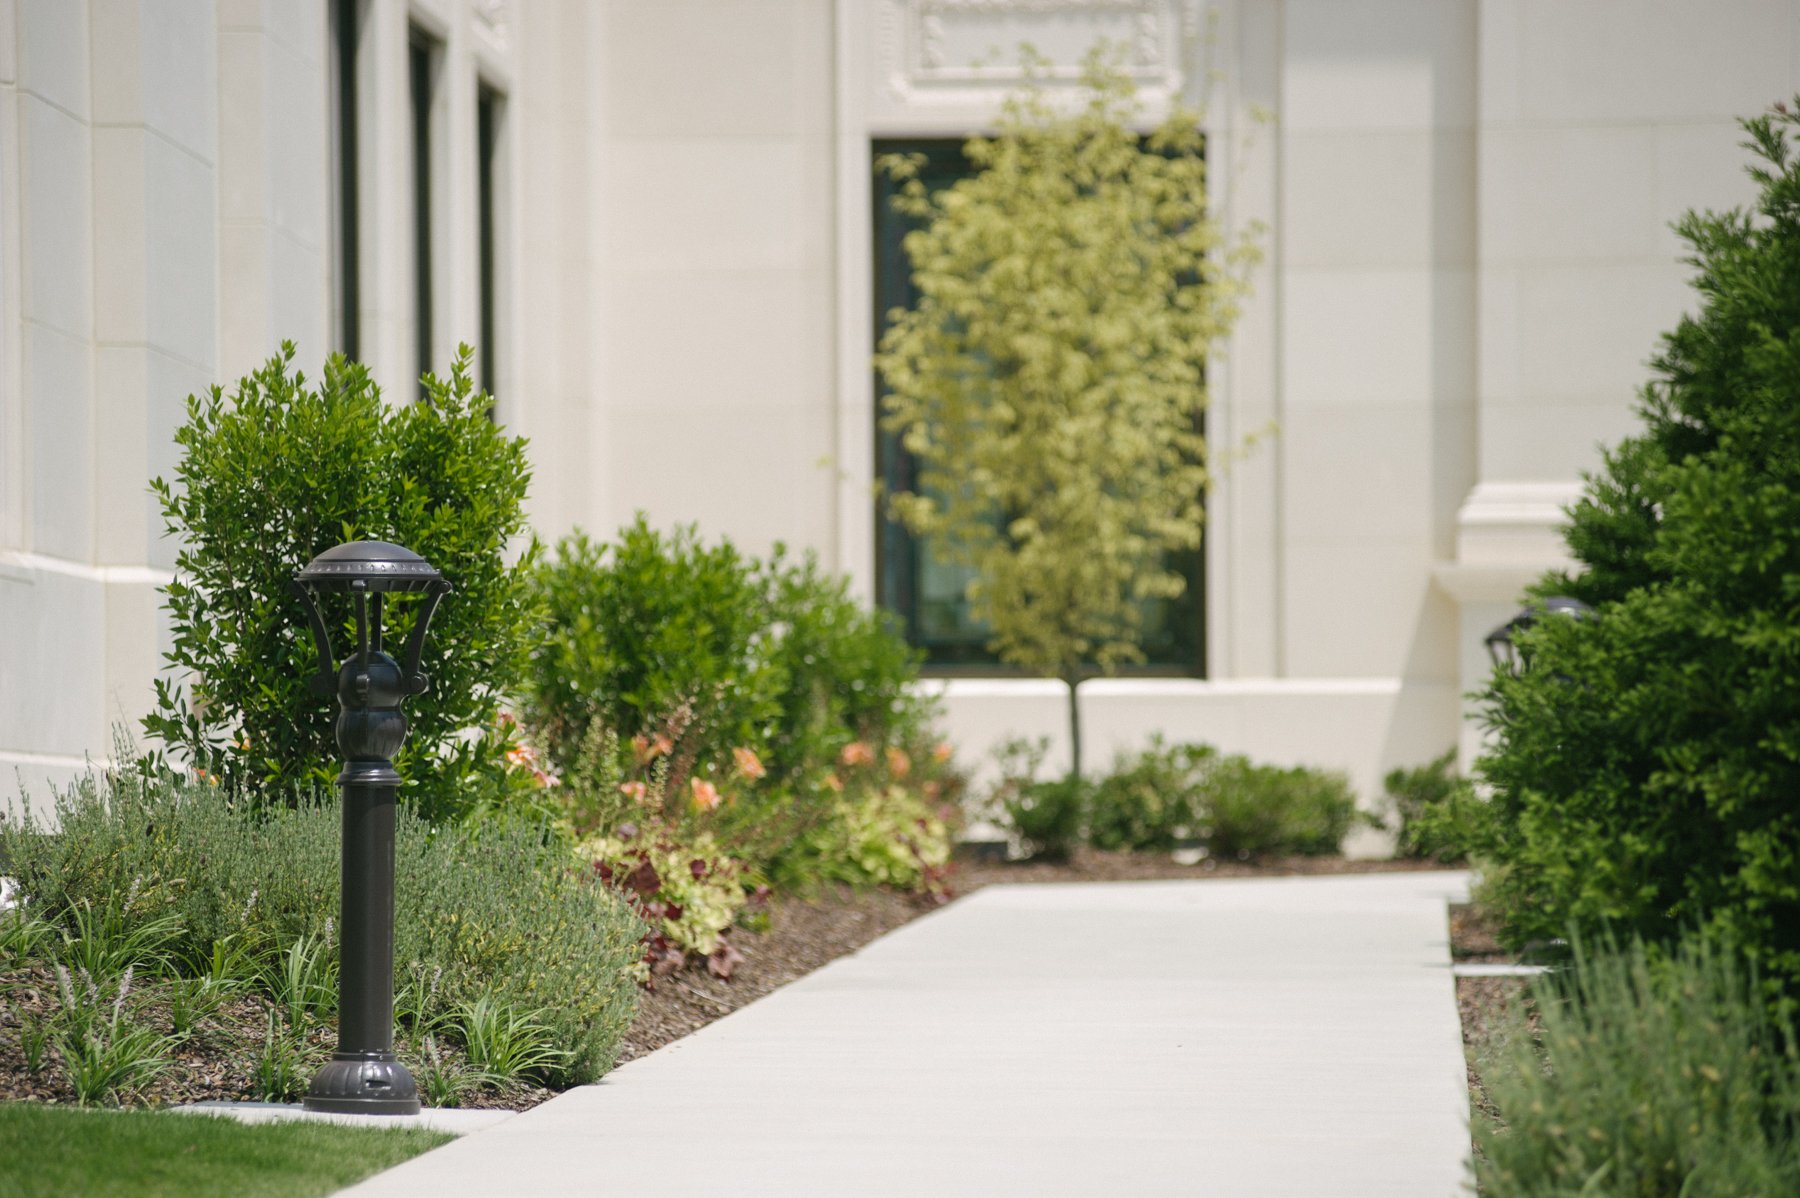 commercial landscape plants on walkway designed for curb appeal